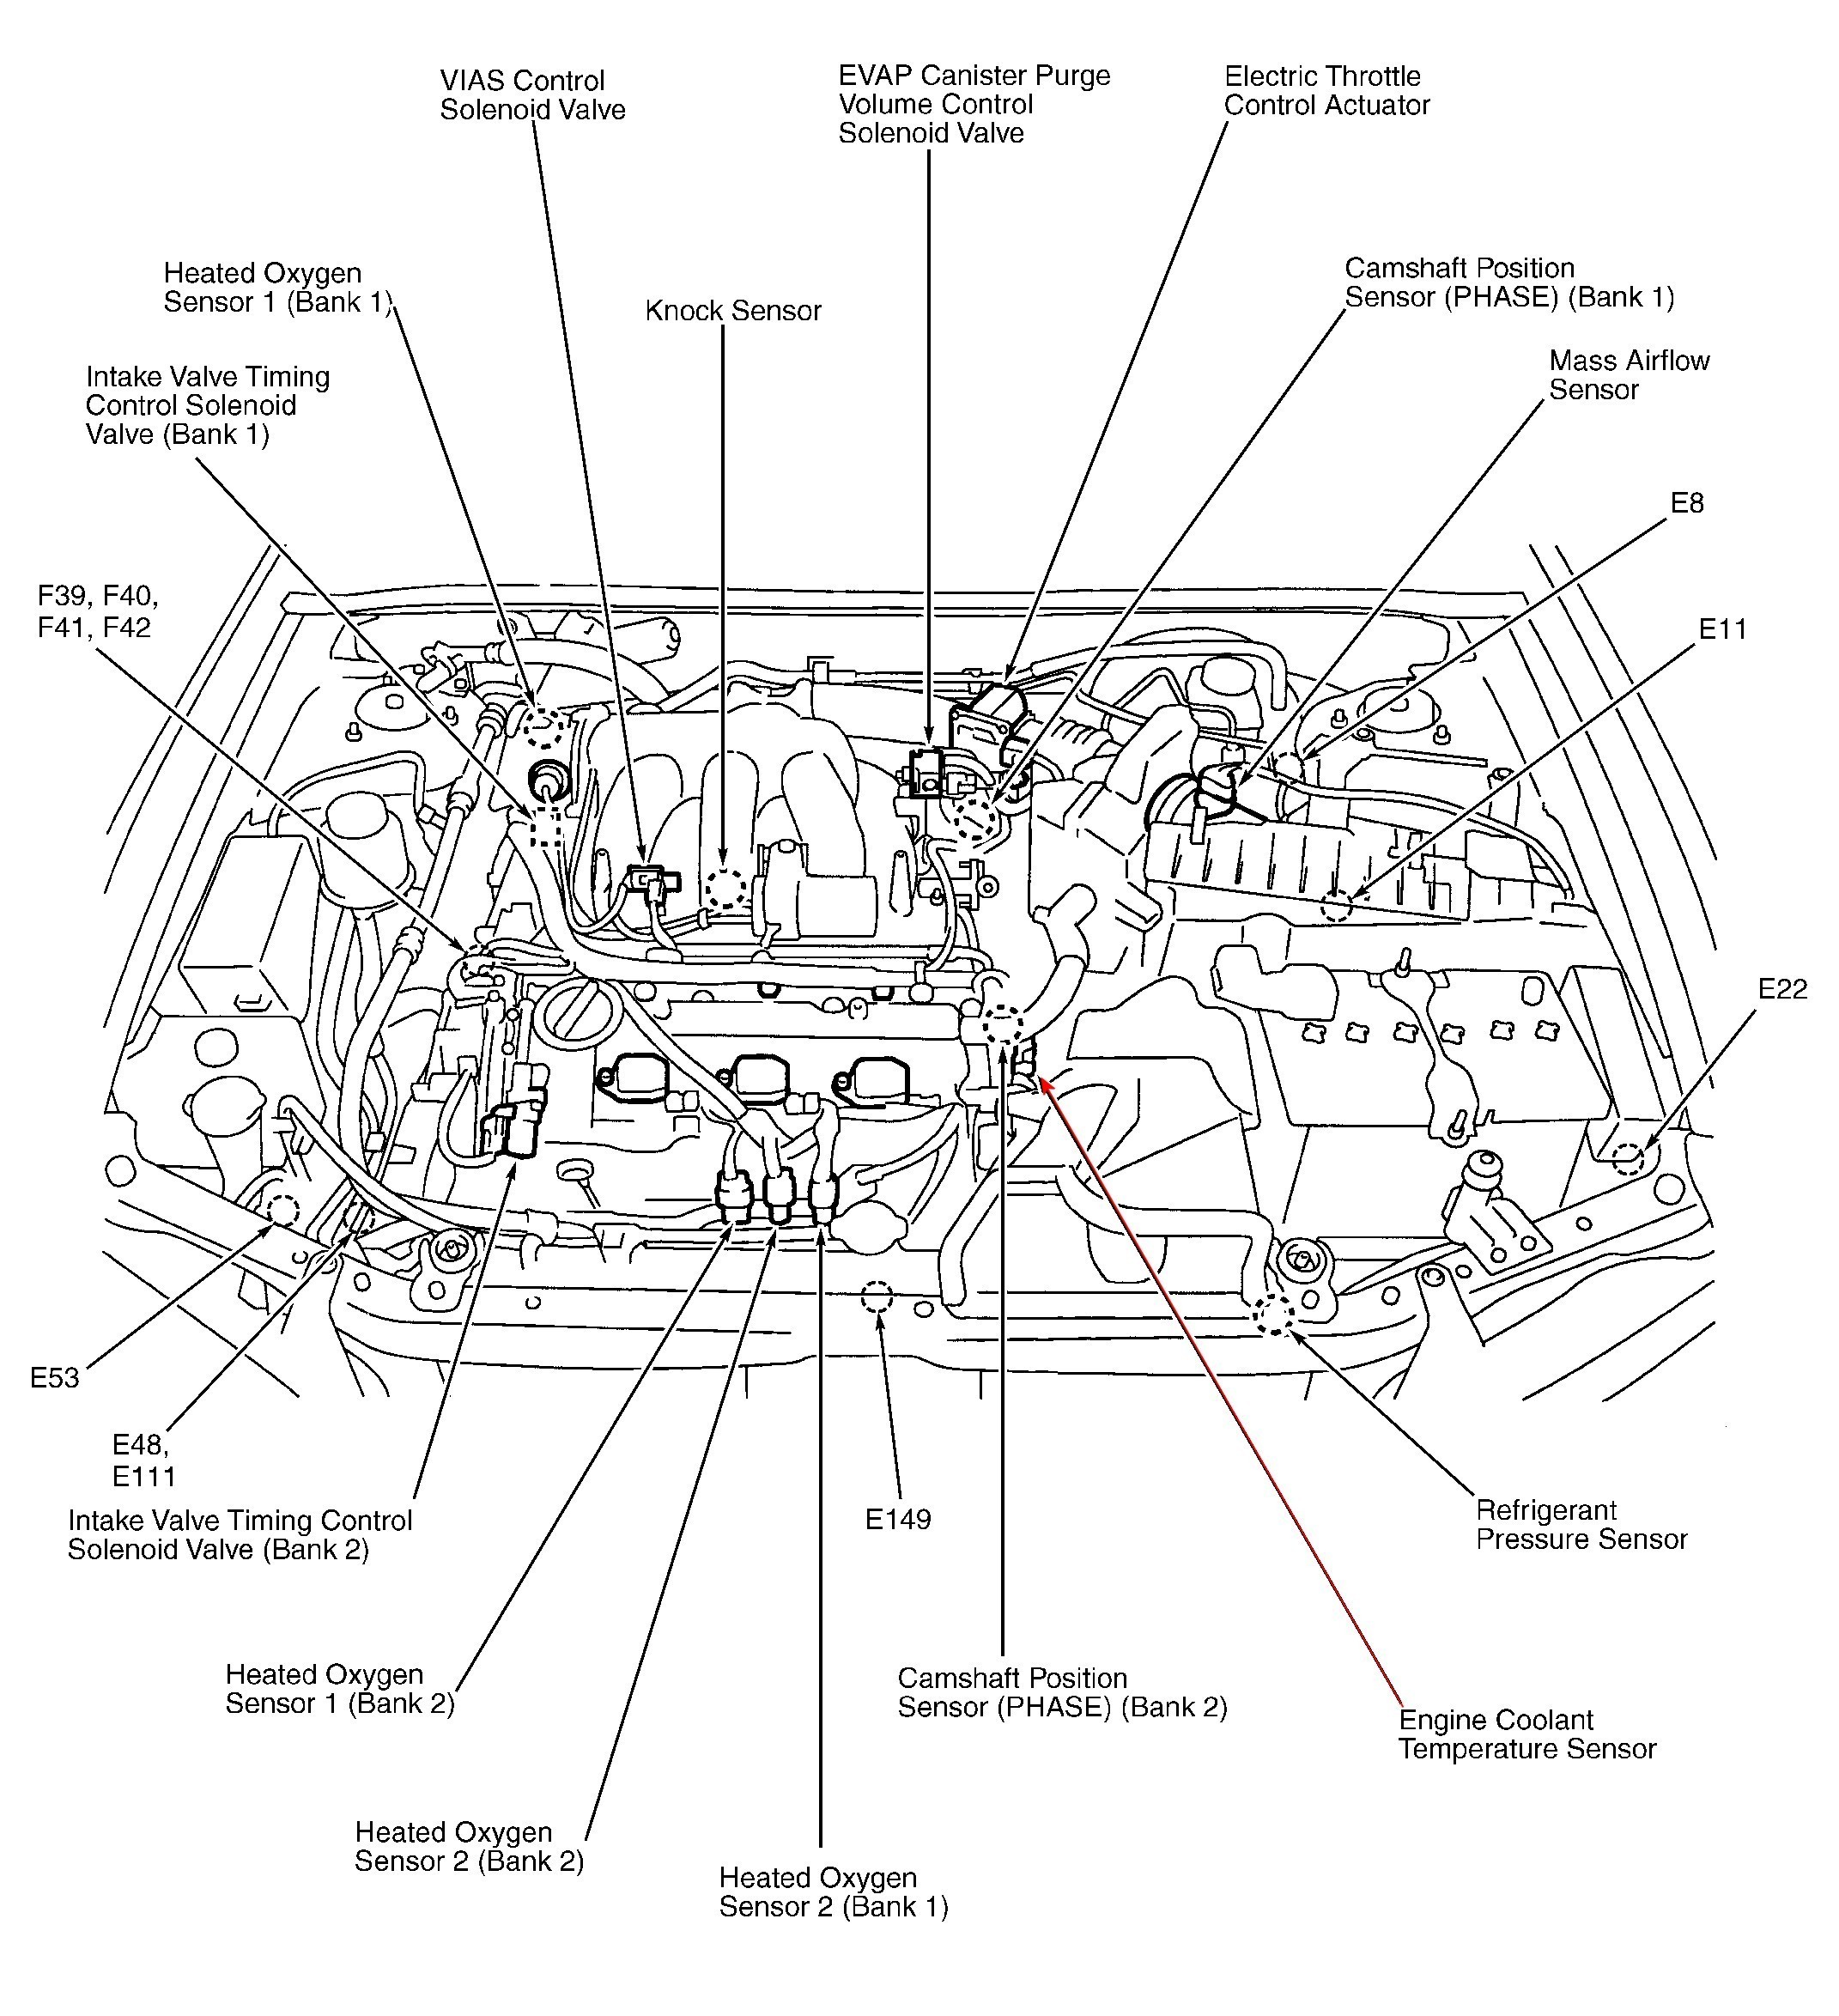 2000 Infiniti I30 Engine Diagram Take A Look About 2000 Nissan Maxima Engine with Awesome Gallery Of 2000 Infiniti I30 Engine Diagram